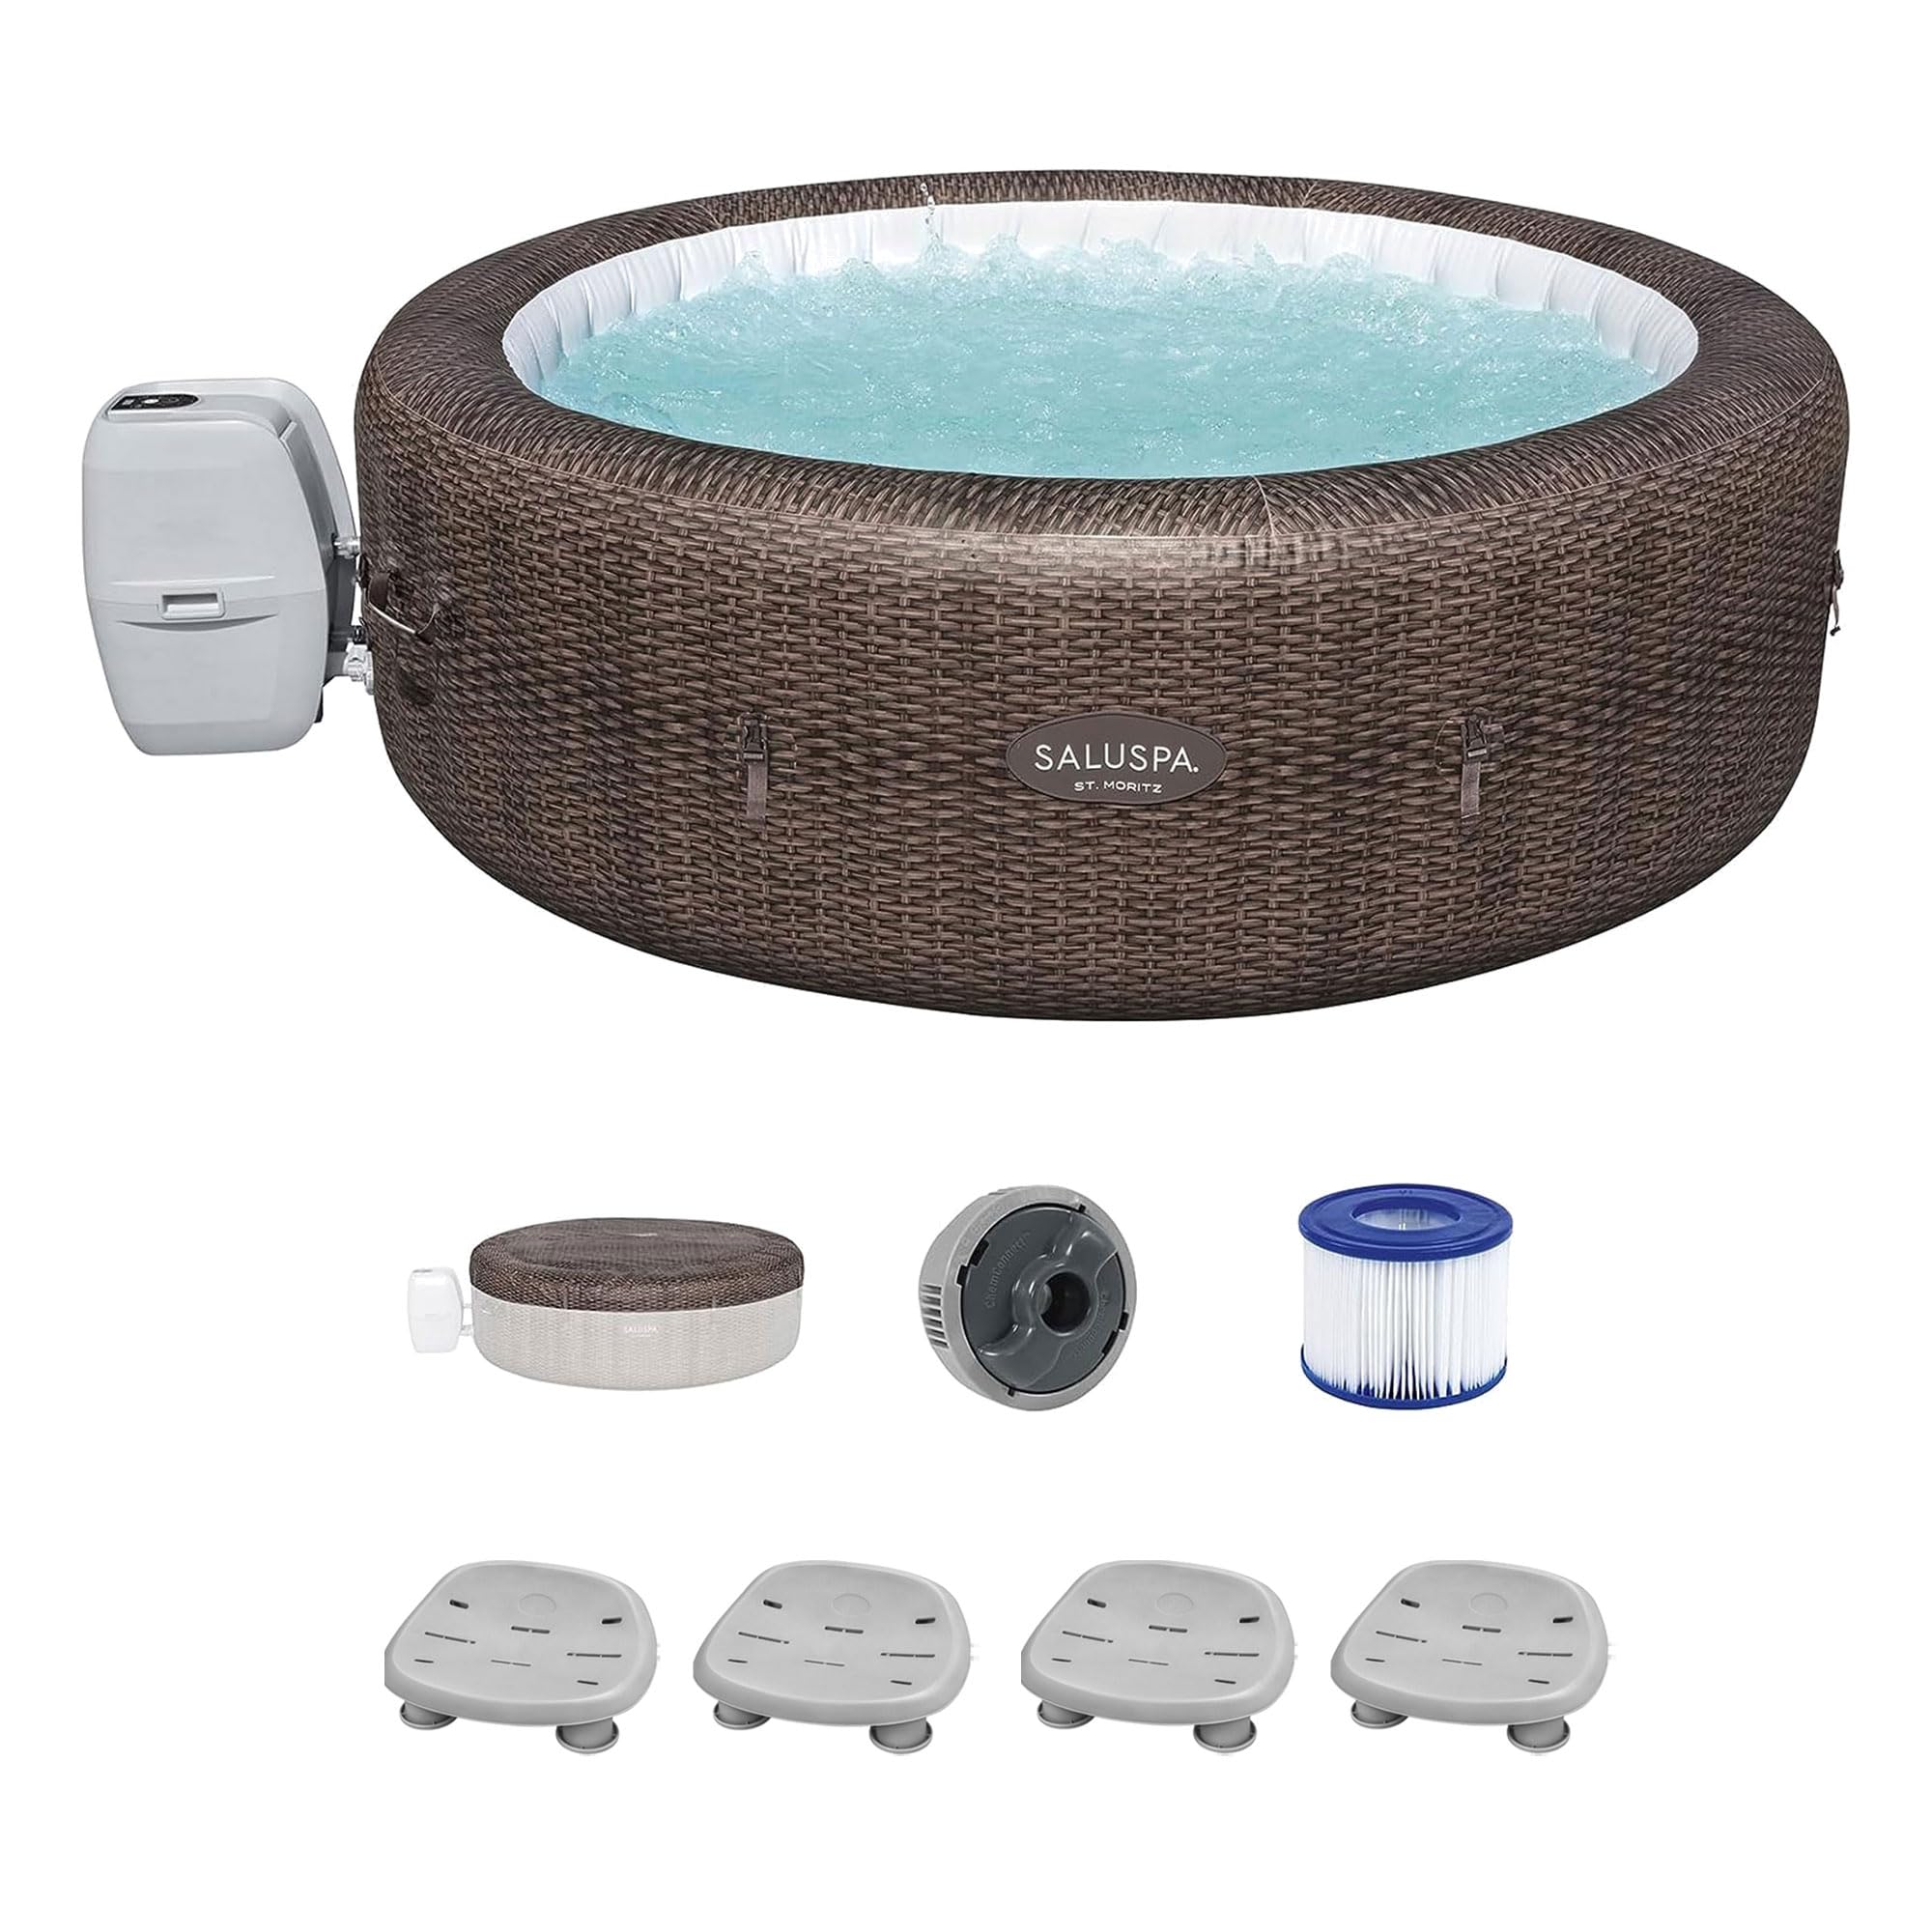 Bestway SaluSpa St Moritz Hot Tub with Chemical Floater and Pump + Bestway SaluSpa Underwater Non Slip Pool with Weighted Feet